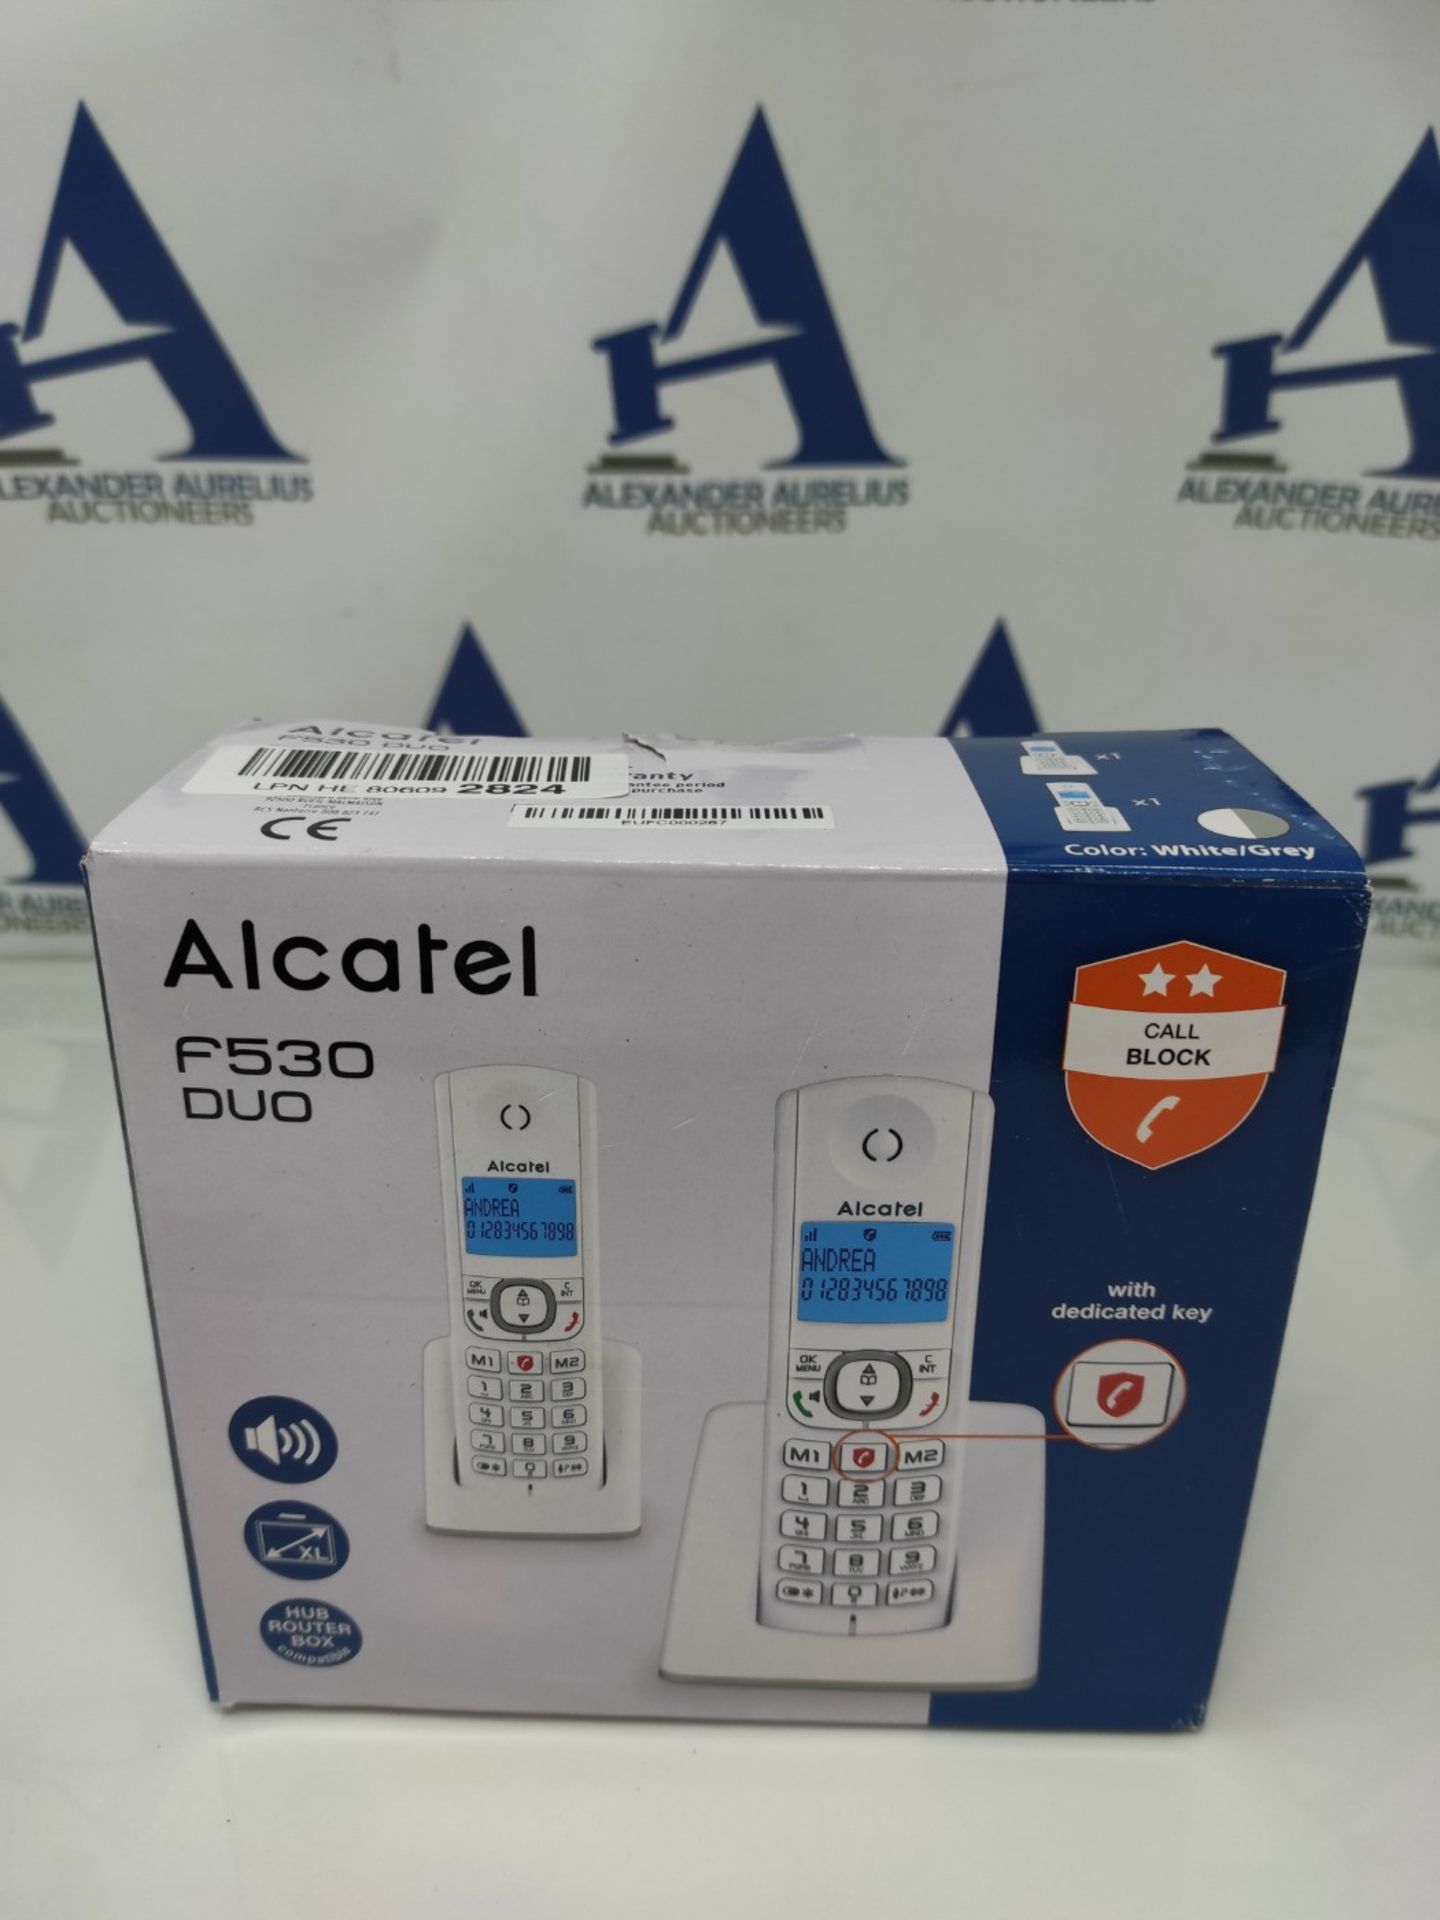 Alcatel F530 Duo, cordless phone with 2 handsets, call blocking, hands-free and two di - Image 2 of 3